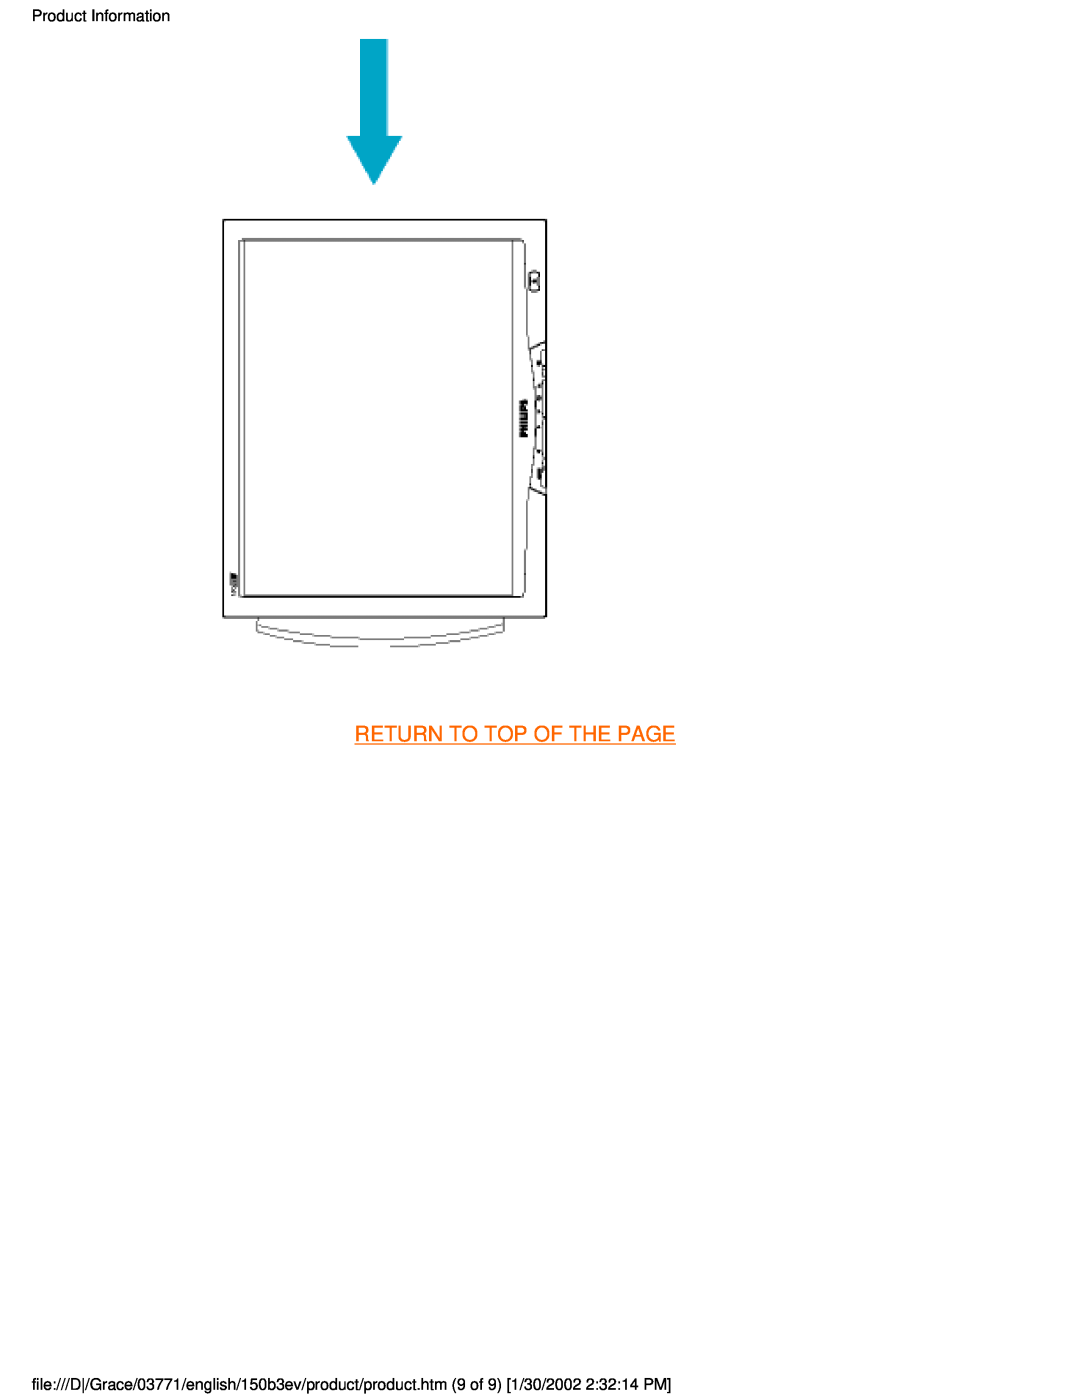 Philips 150B3V, 150B3E user manual Return To Top Of The Page, Product Information 